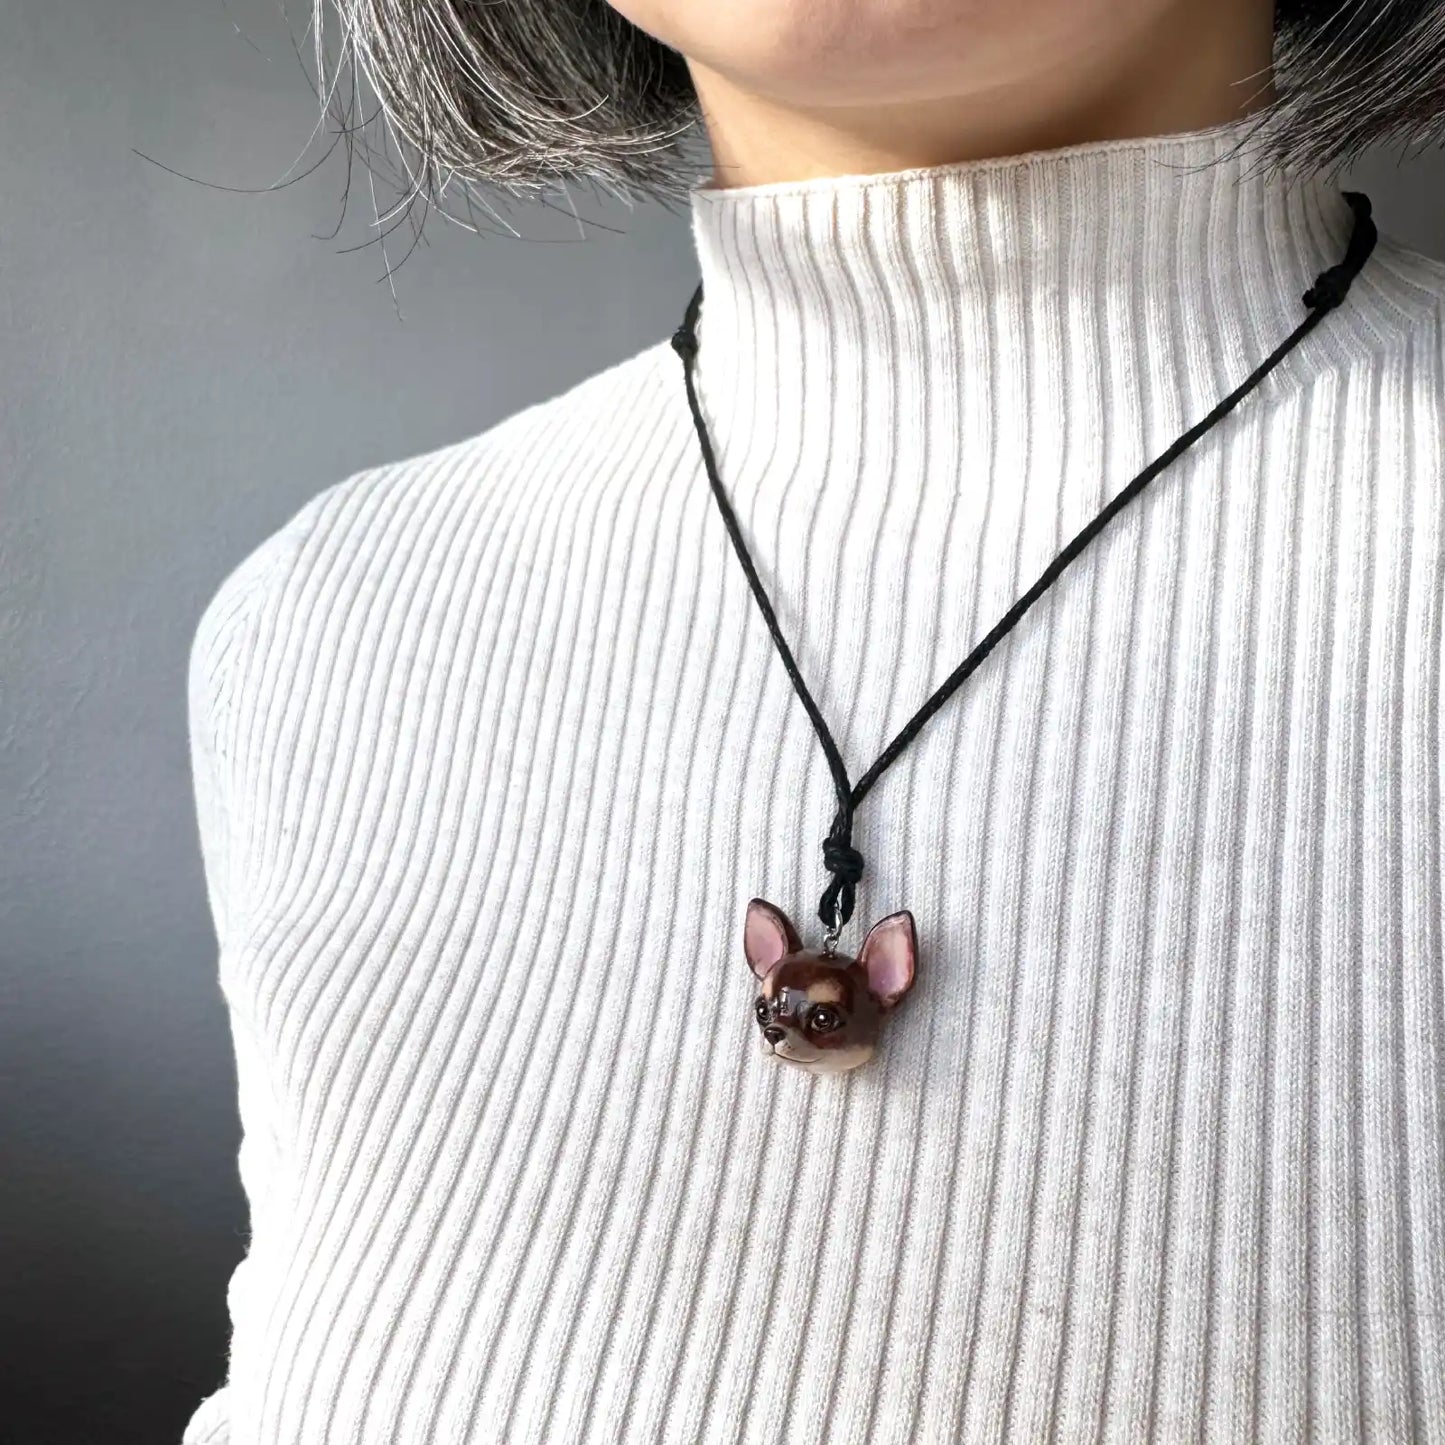 Chihuahua Pendant necklace | Shorthair | Chocolate & Tan